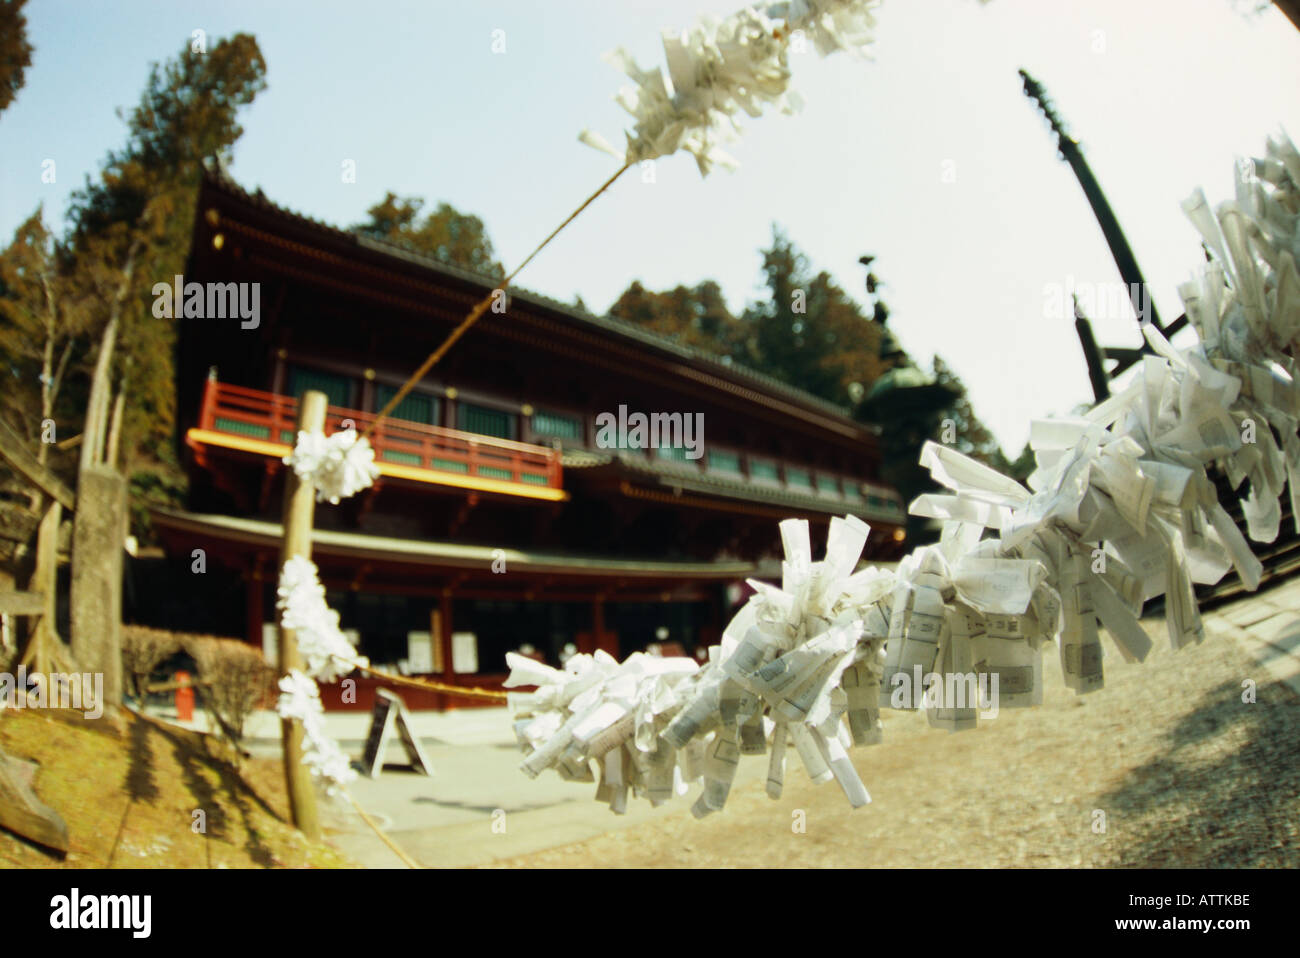 Omikuji prayers in foreground of temple in Japan Stock Photo